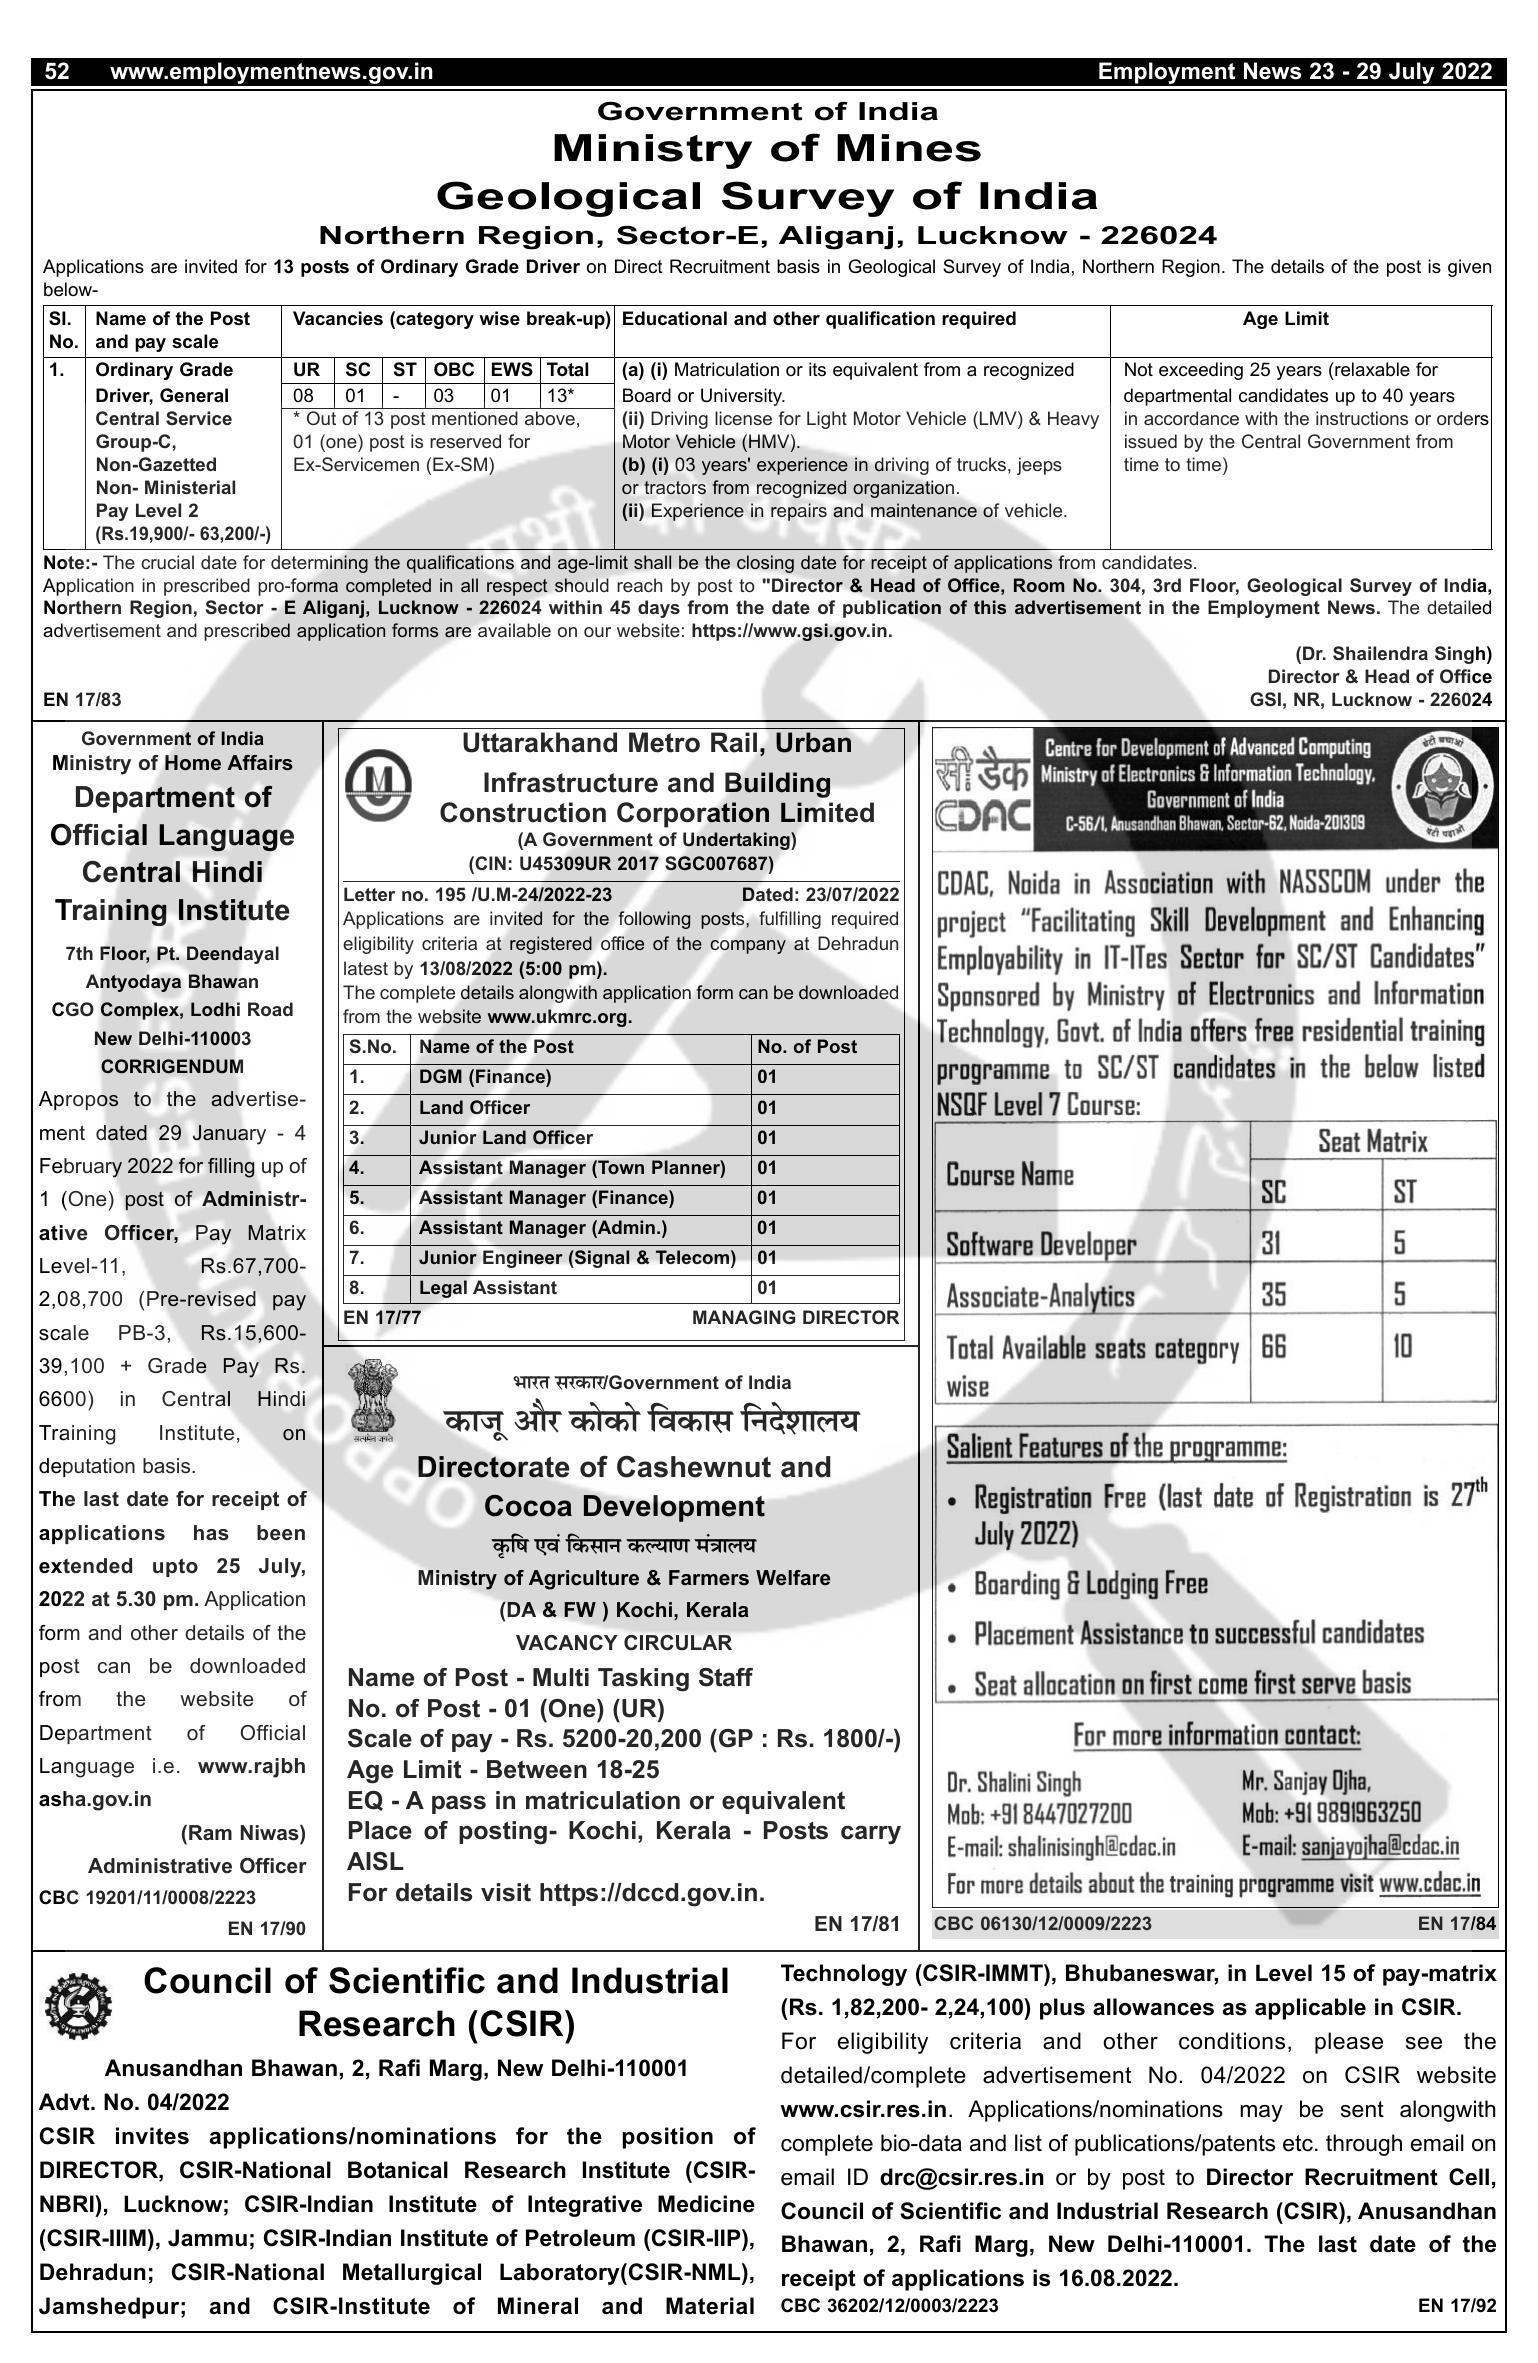 Geological Survey of India (GSI) Ordinary Grade Driver Recruitment 2022 - Page 1